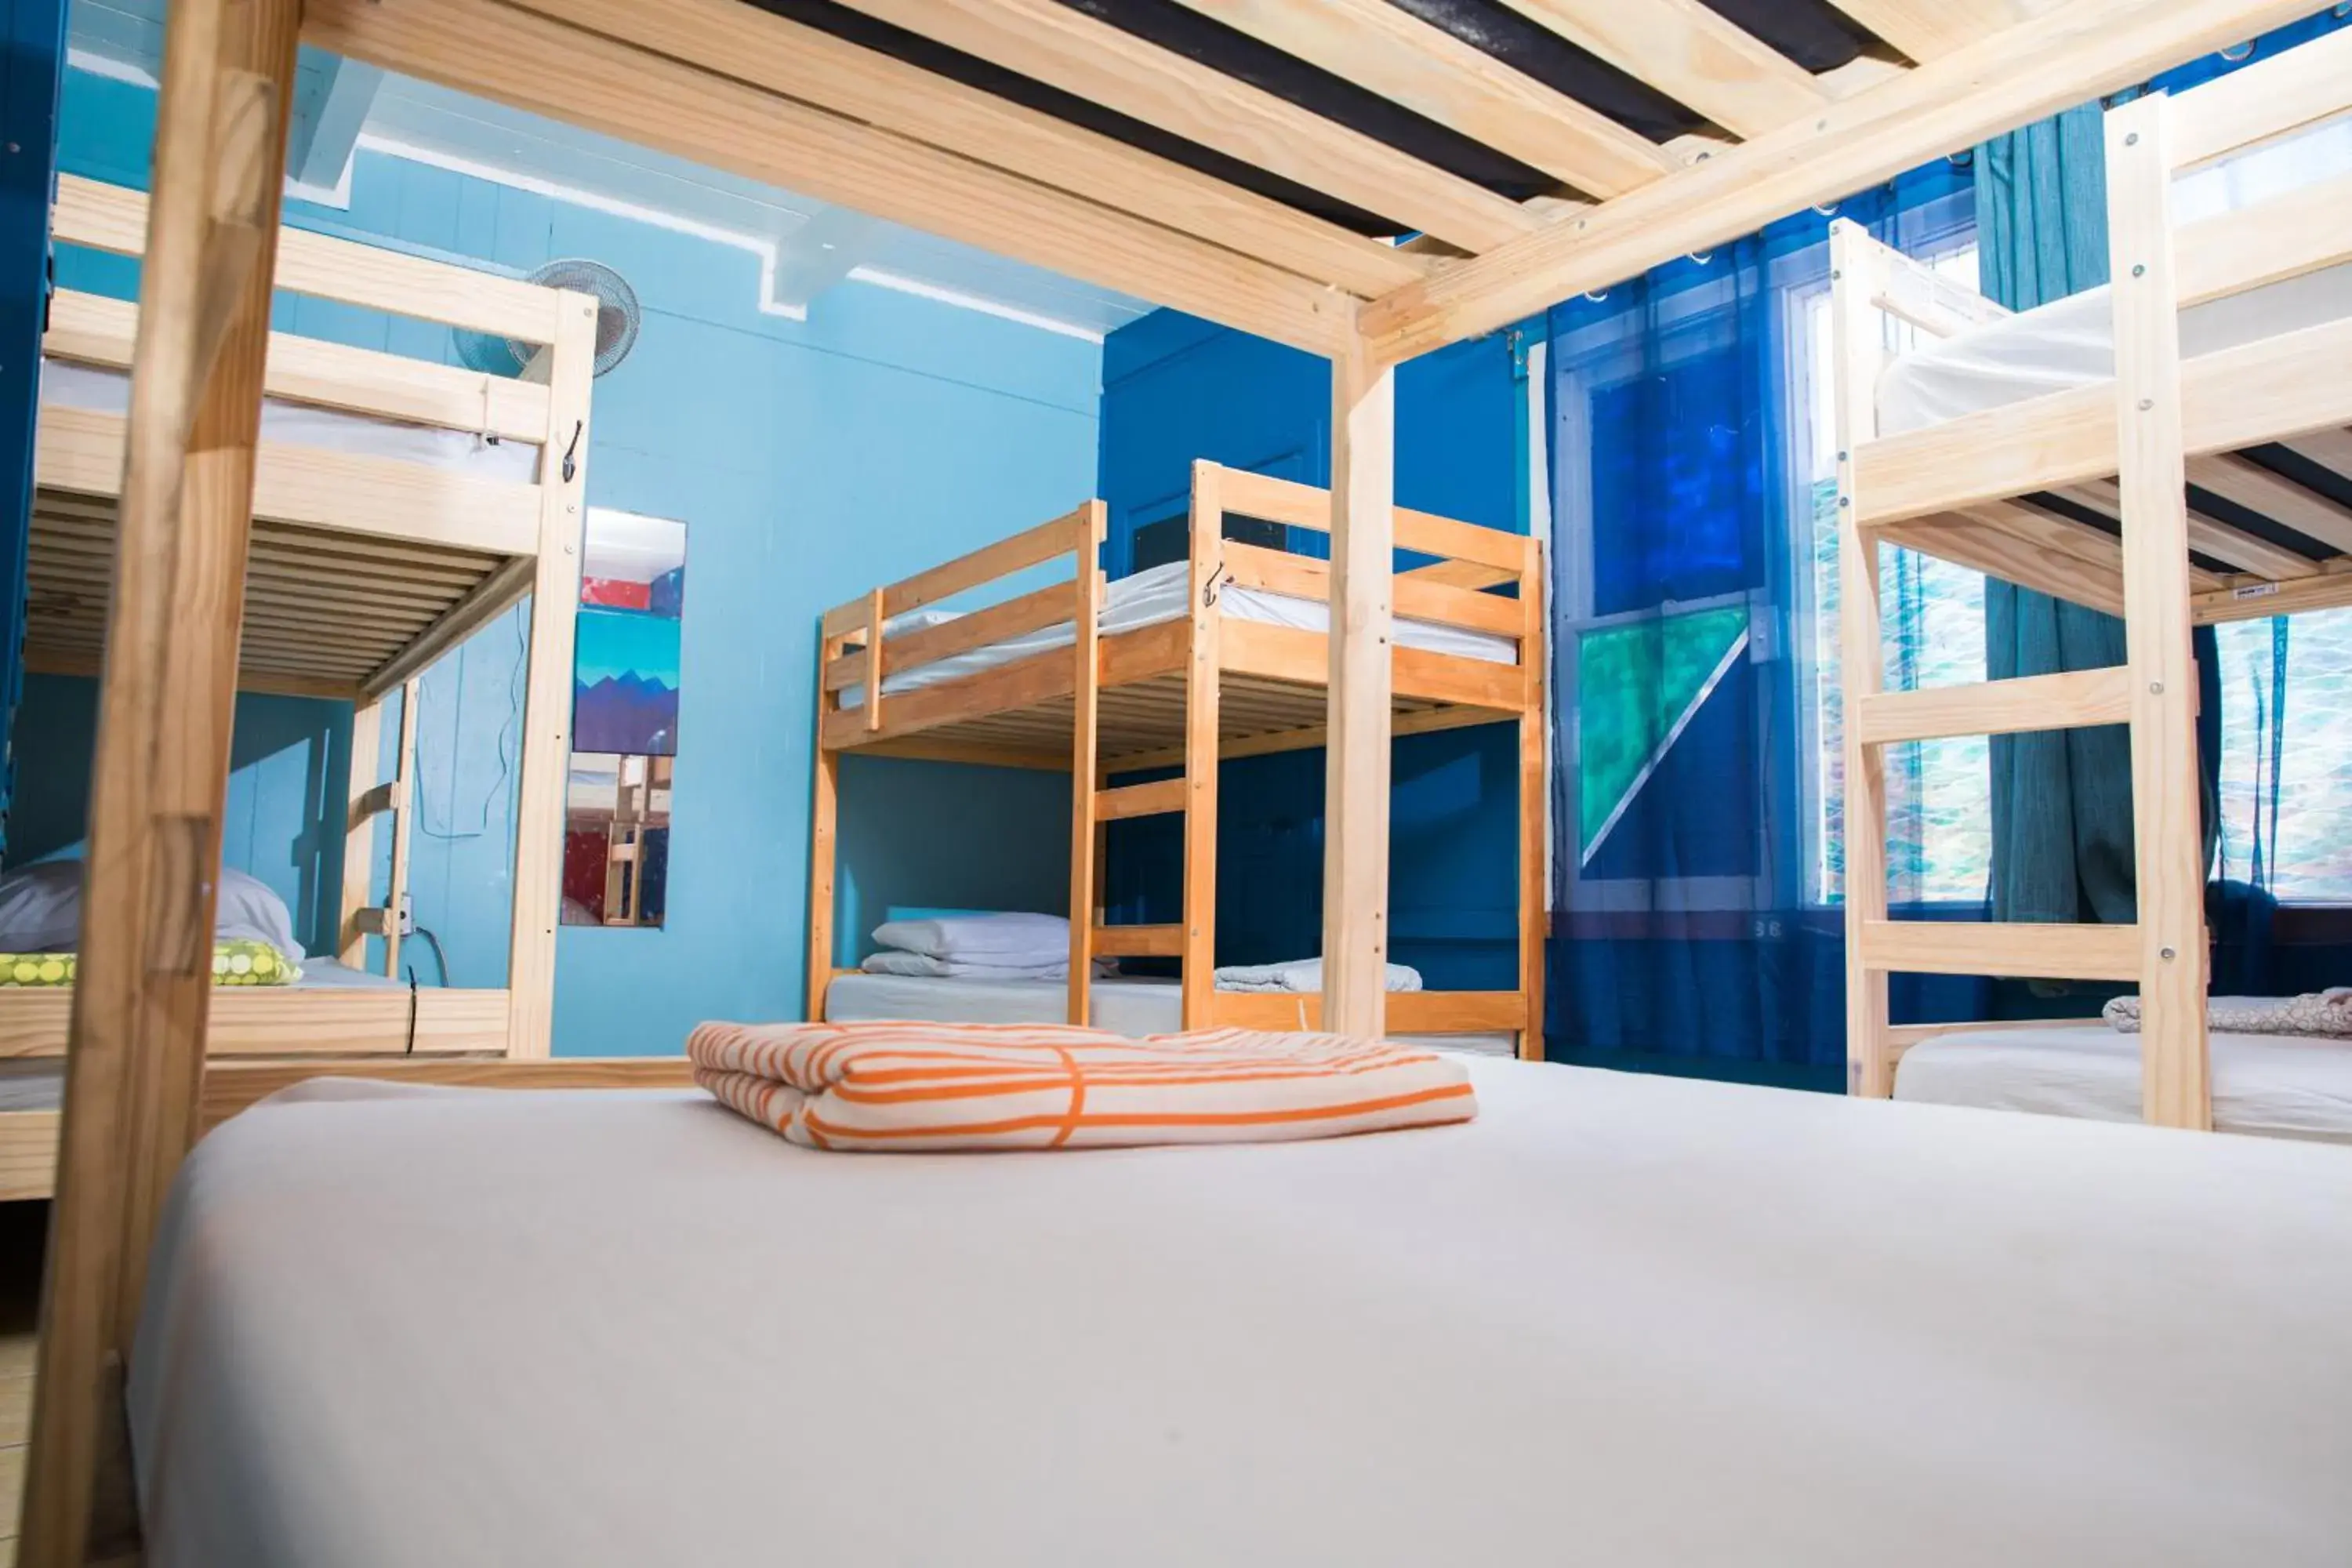 Bunk Bed in ITH Beach Bungalow Surf Hostel San Diego